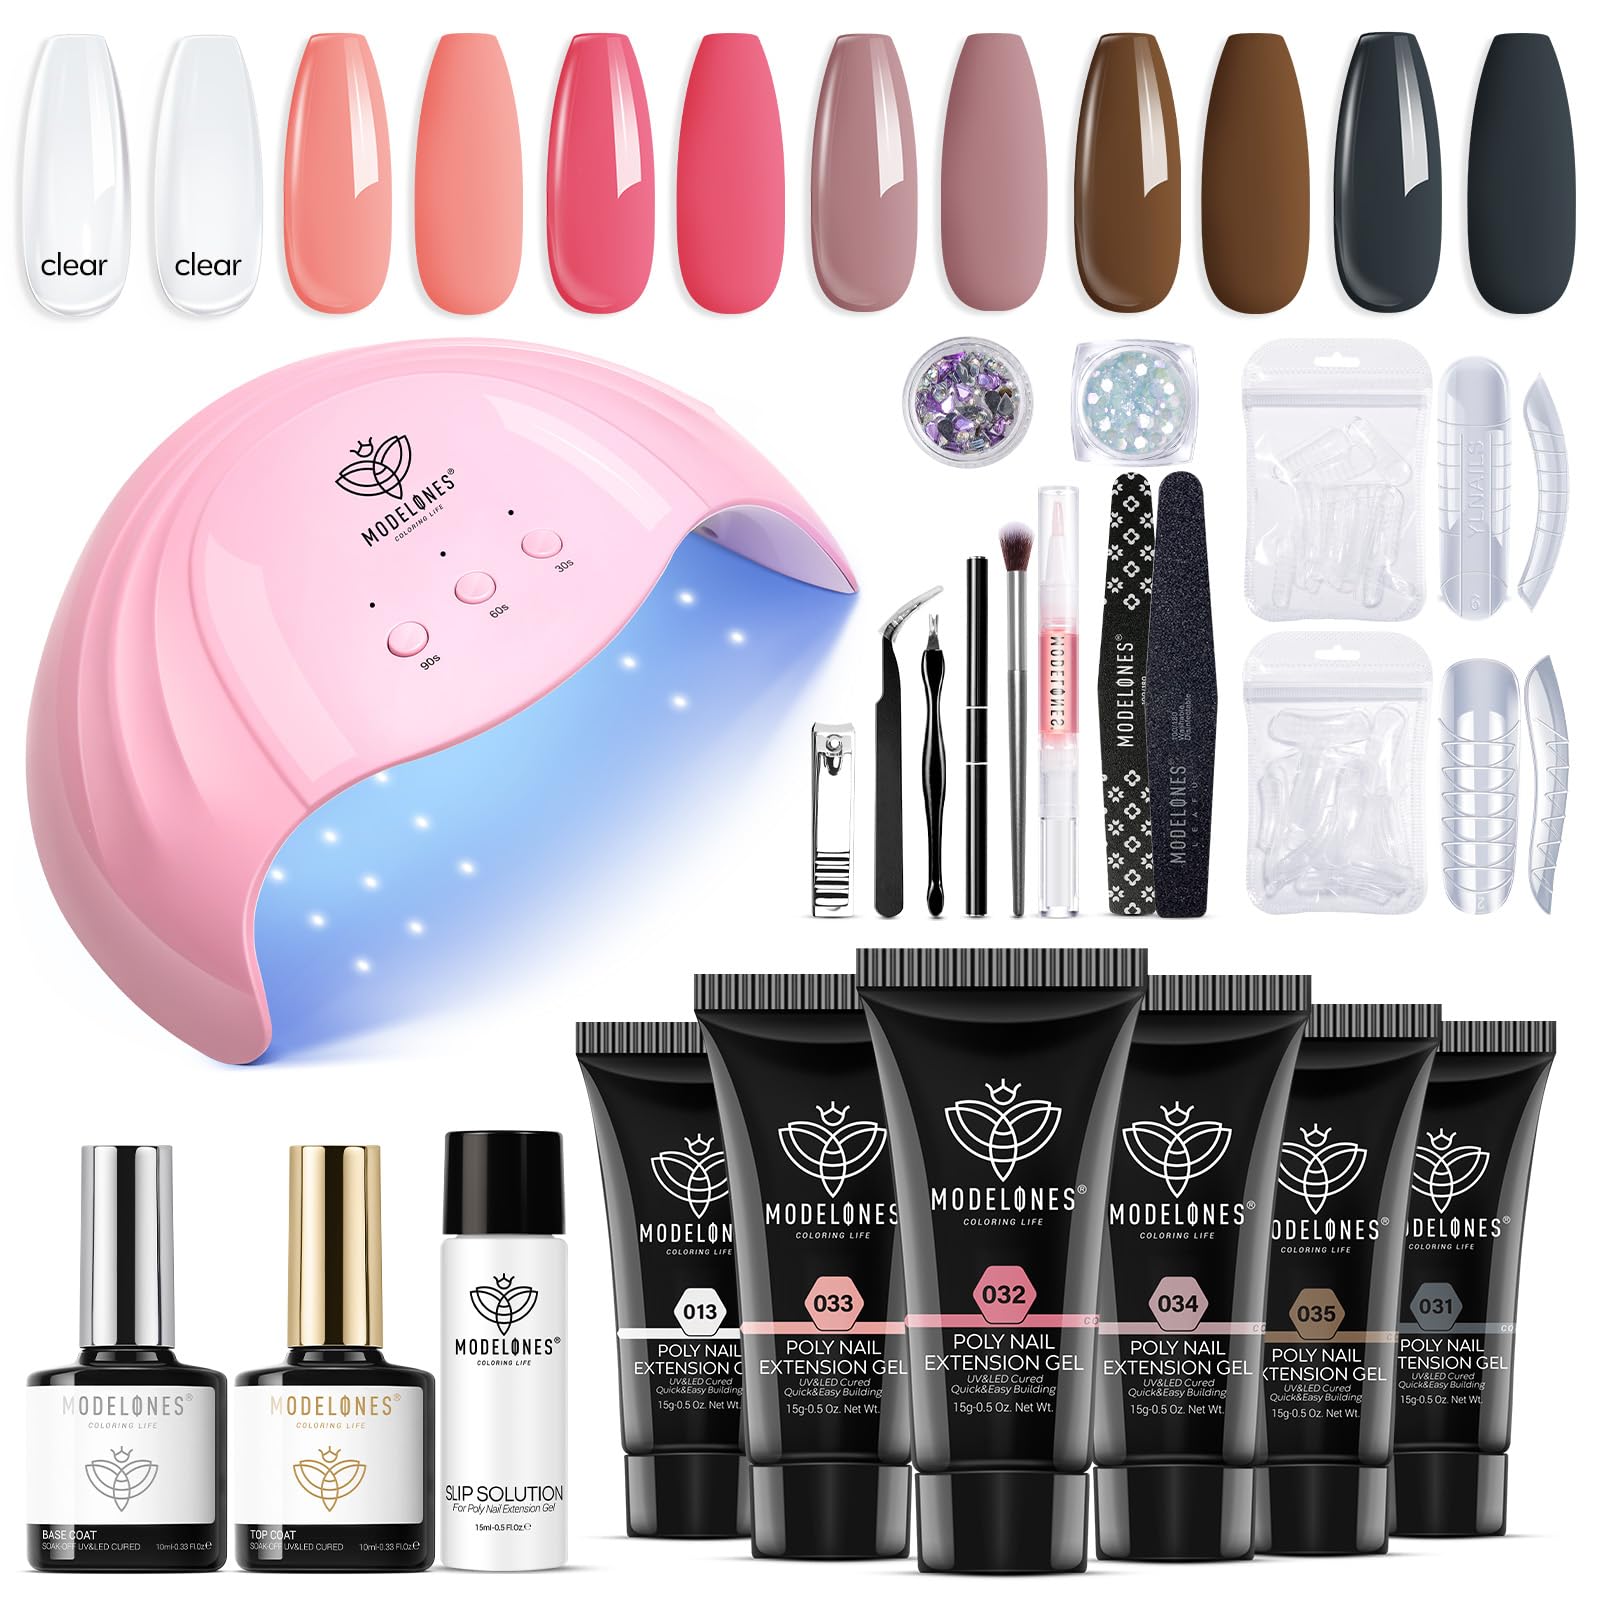 Buy THR3E STROKES Poly Nail Gel Extension Kit With Slip Solution Uv Nail  Lamp for Builder Gel UV Nail Art Kit Nail Extension Set. (WHITE+CLEAR  POLYGEL) Online at Low Prices in India -